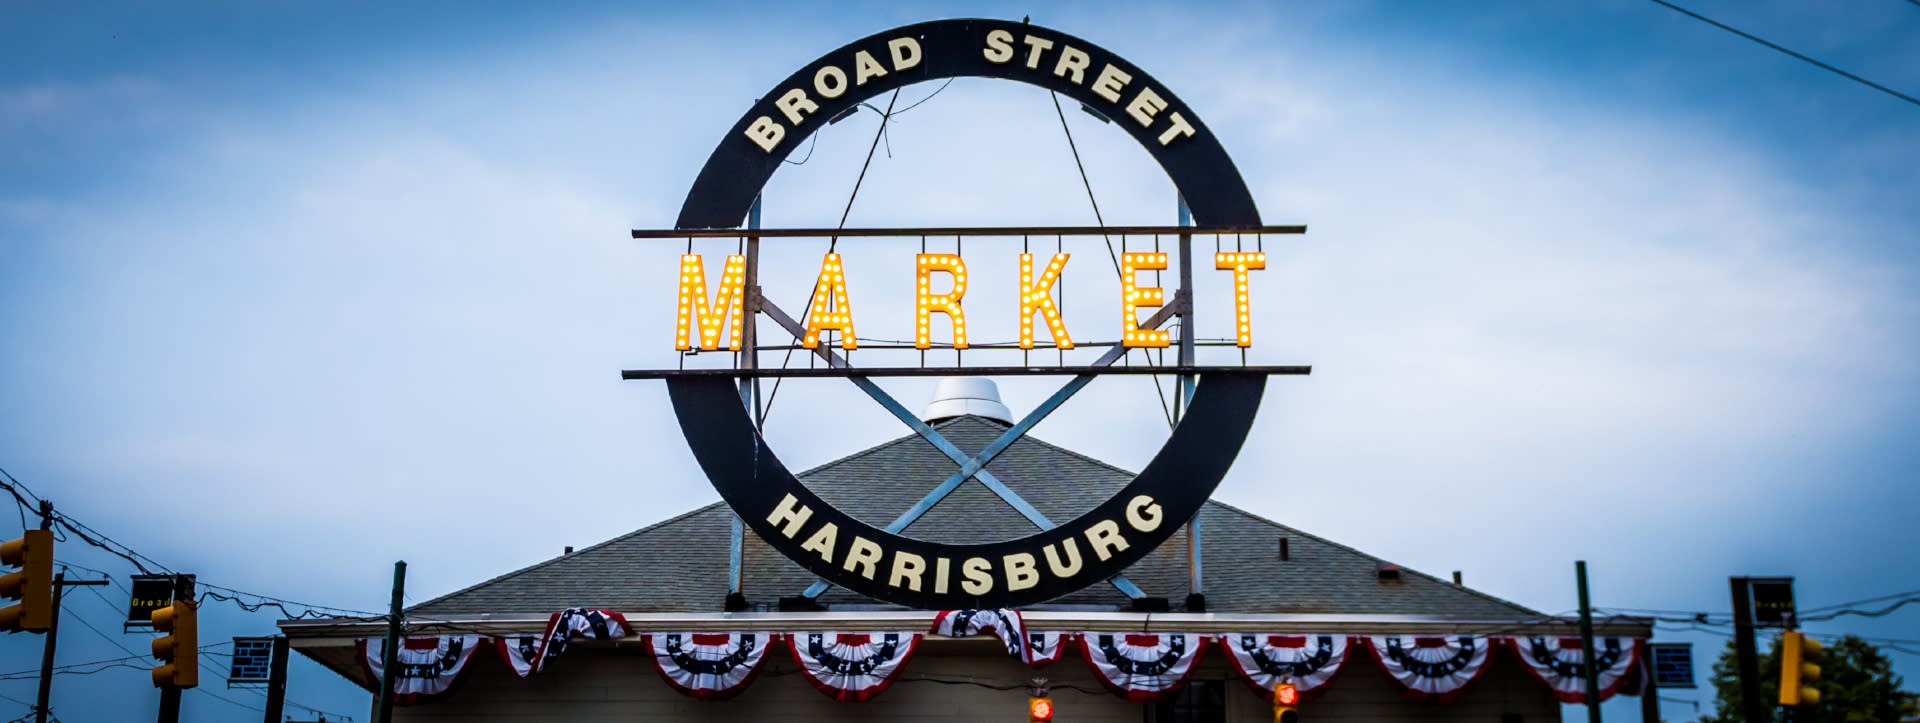 Find Culture Character Cuisine At Broad Street Market In Harrisburg